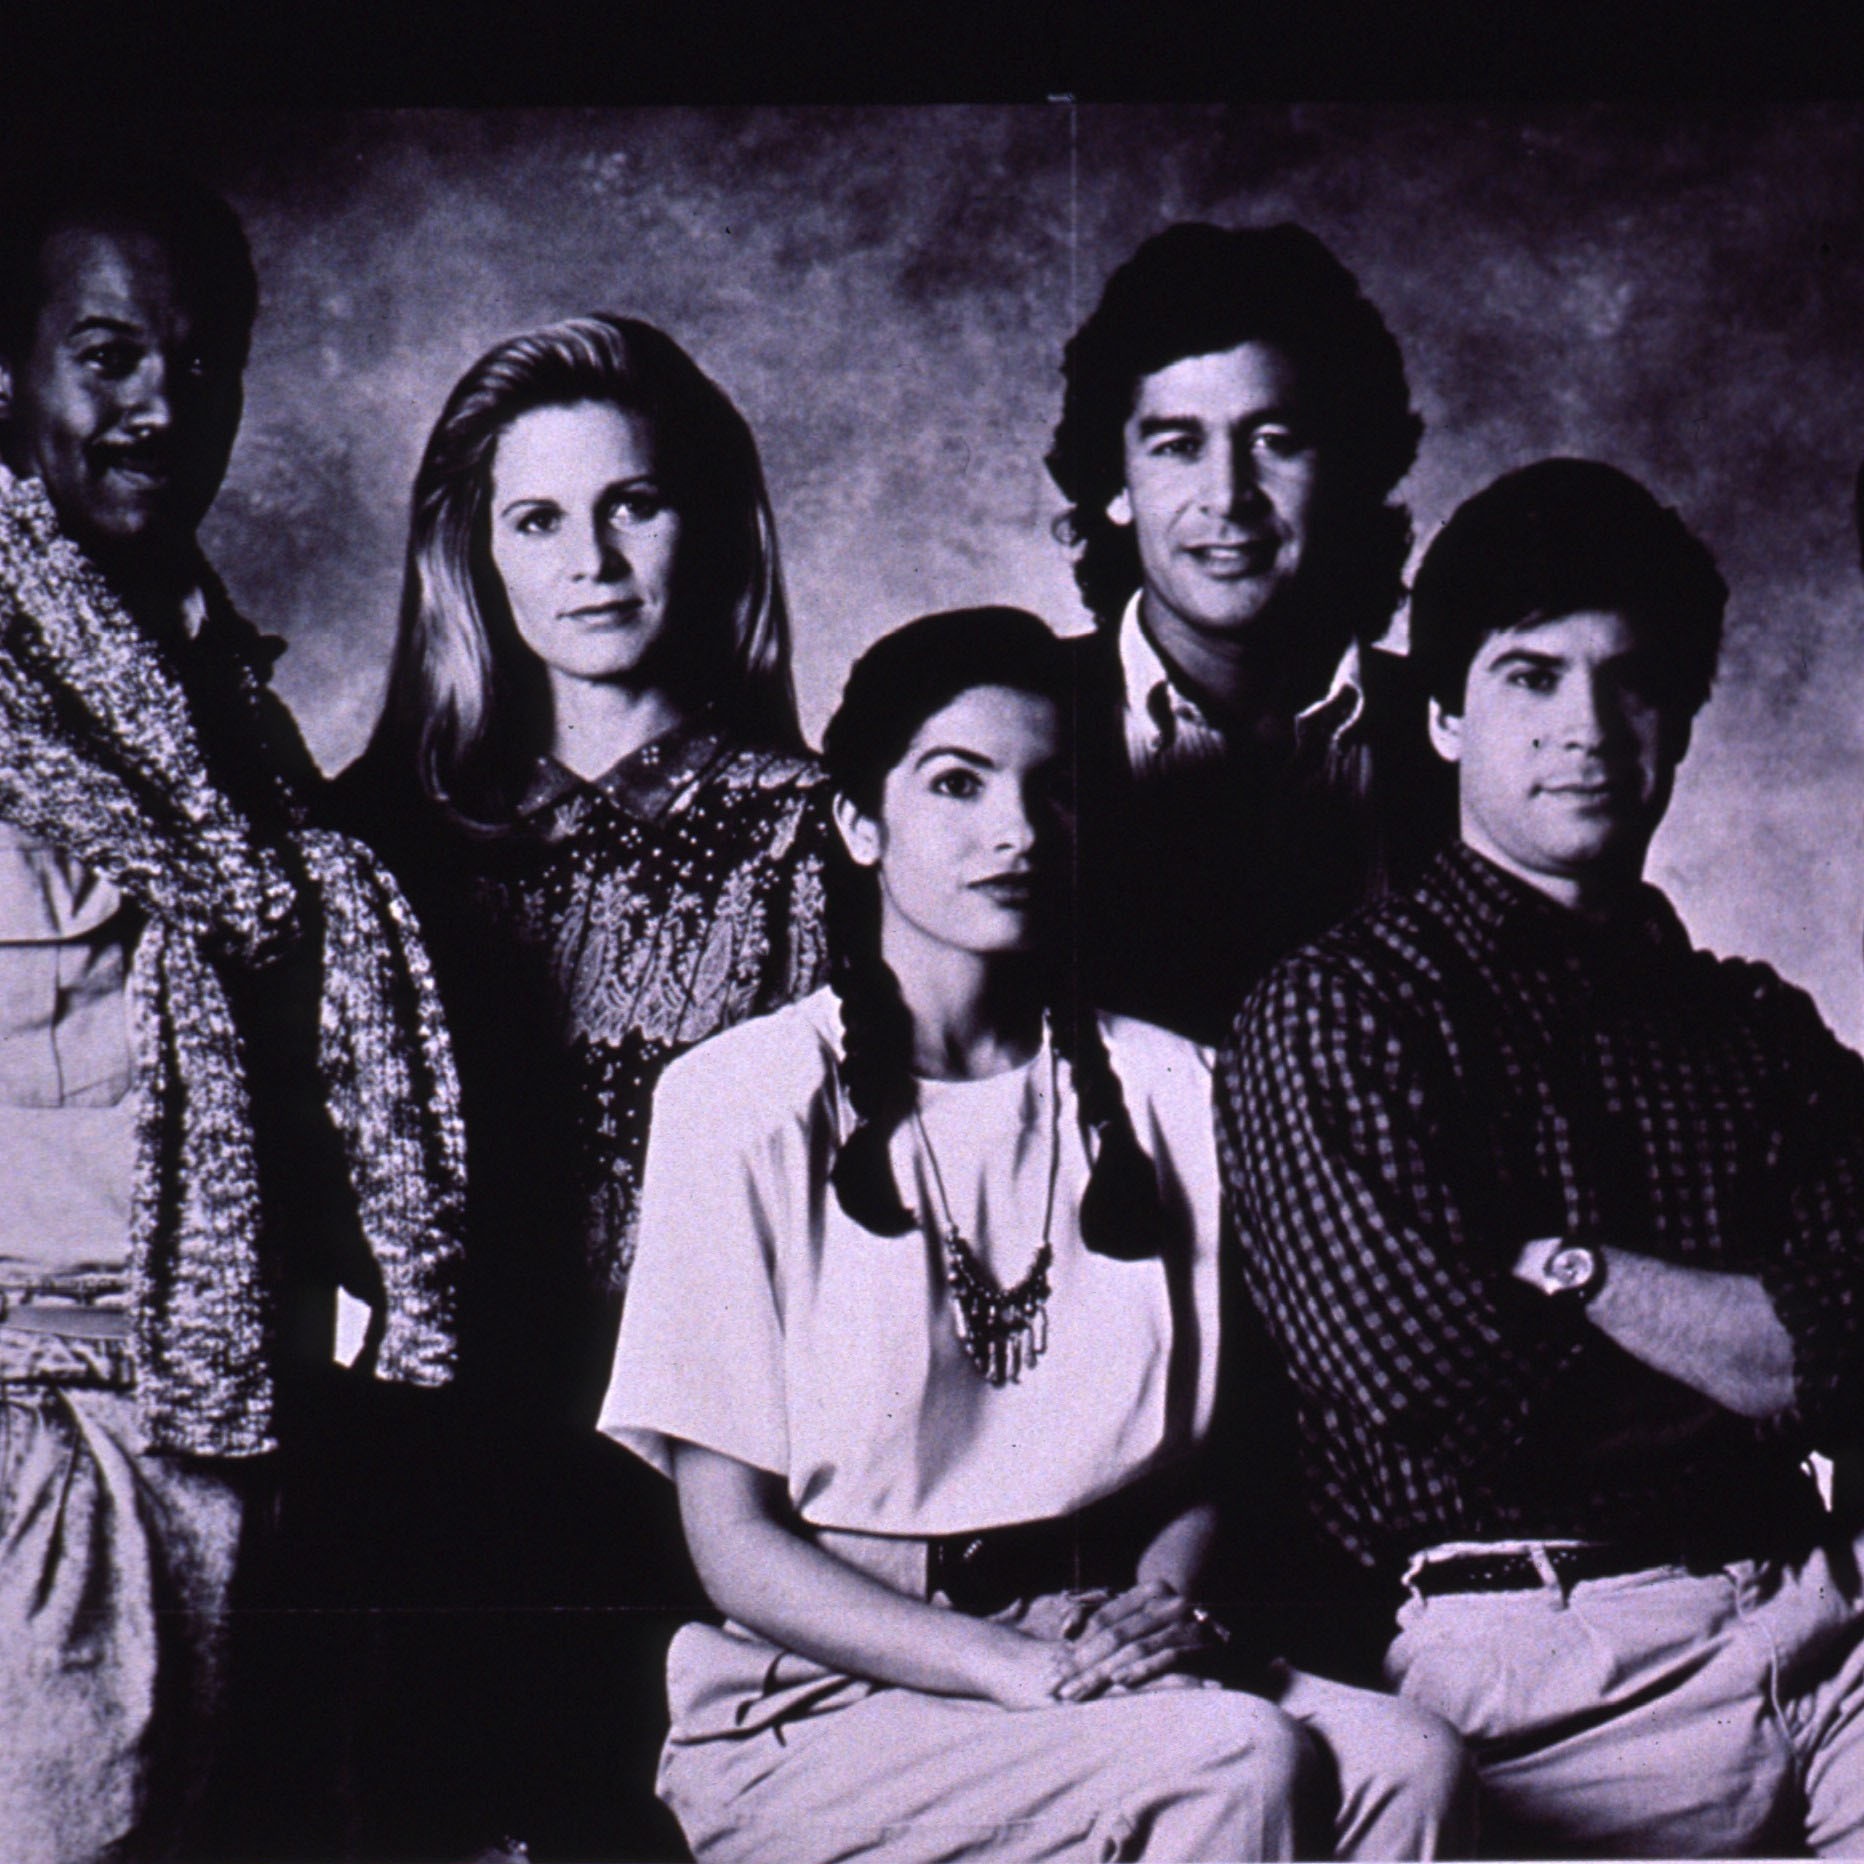 An image of a group of people from the time, which appears to be the 1980s